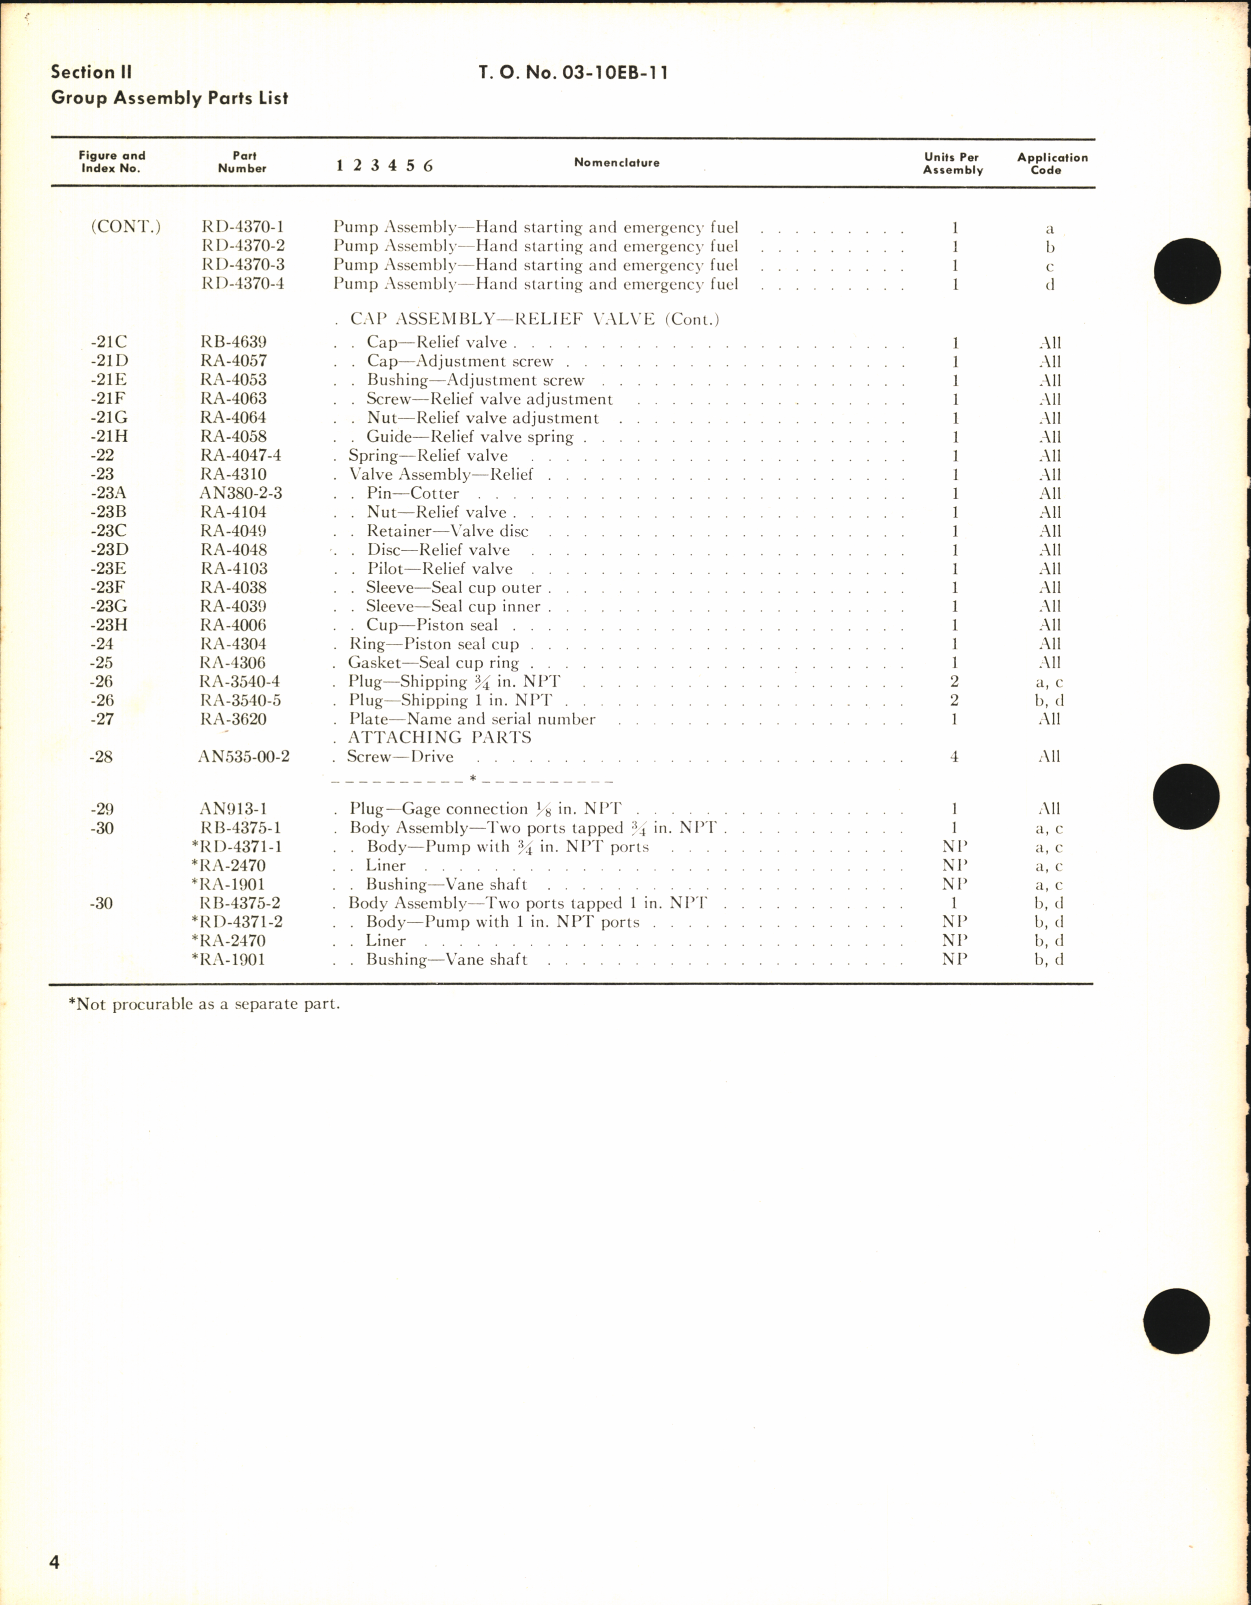 Sample page 6 from AirCorps Library document: Parts Catalog for USAF Type D-2A Hand Fuel Pumps Model RD-4370 Series